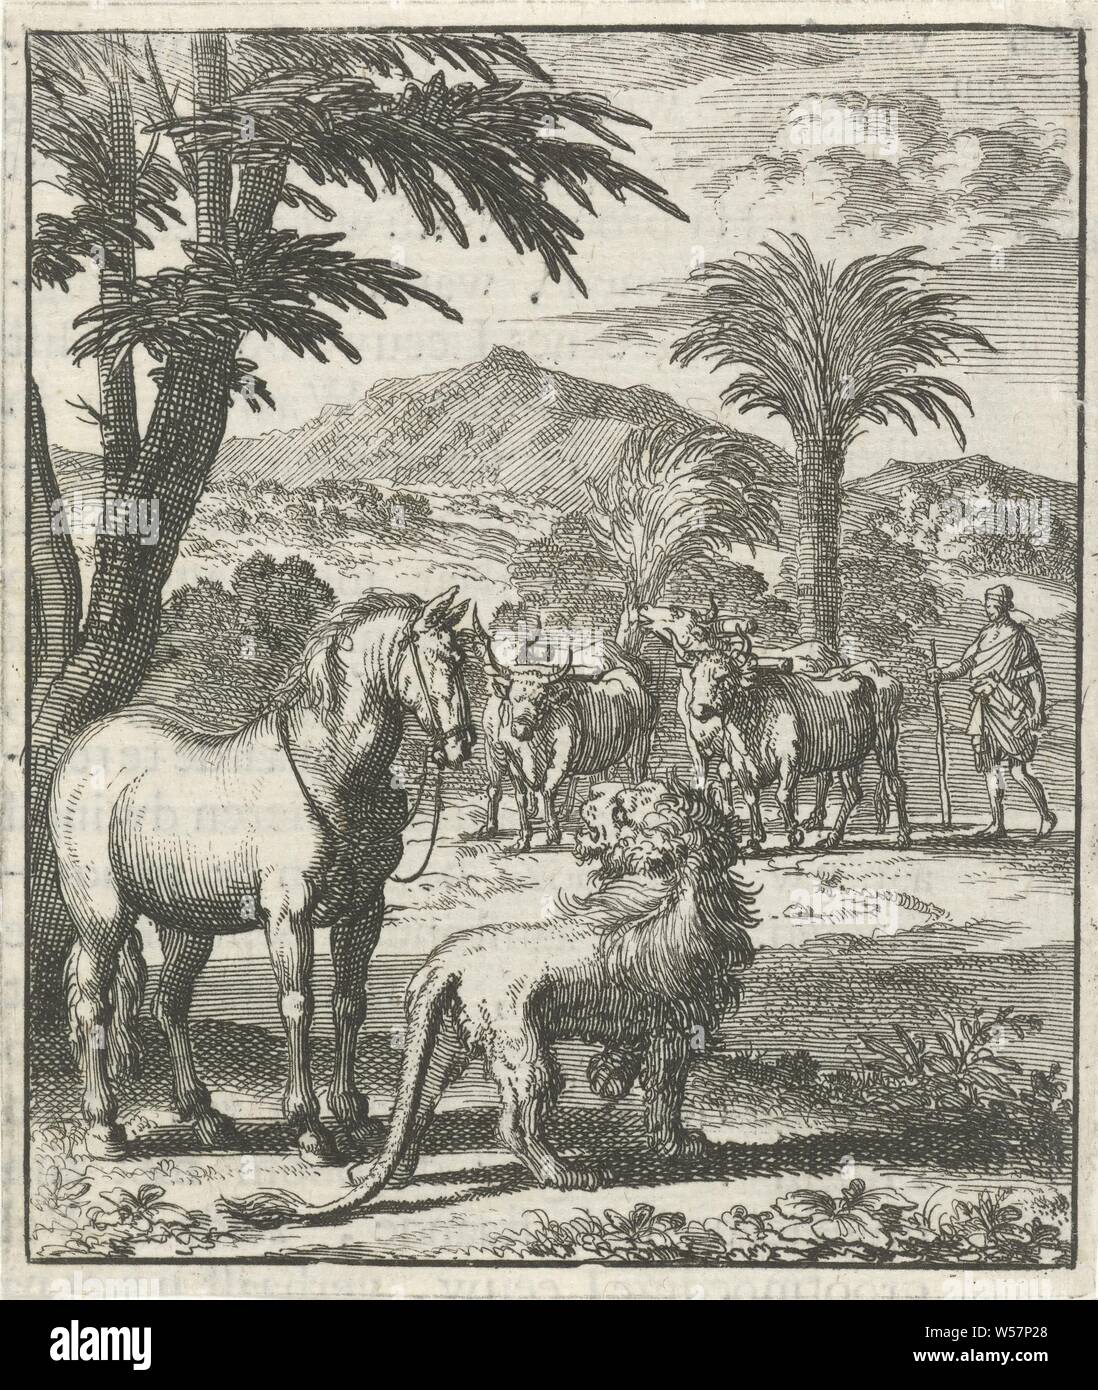 Young lion in conversation with a horse, beasts of prey, predatory animals: lion, horse, Jan Luyken, Amsterdam, 1693, paper, letterpress printing, h 91 mm × w 77 mm Stock Photo